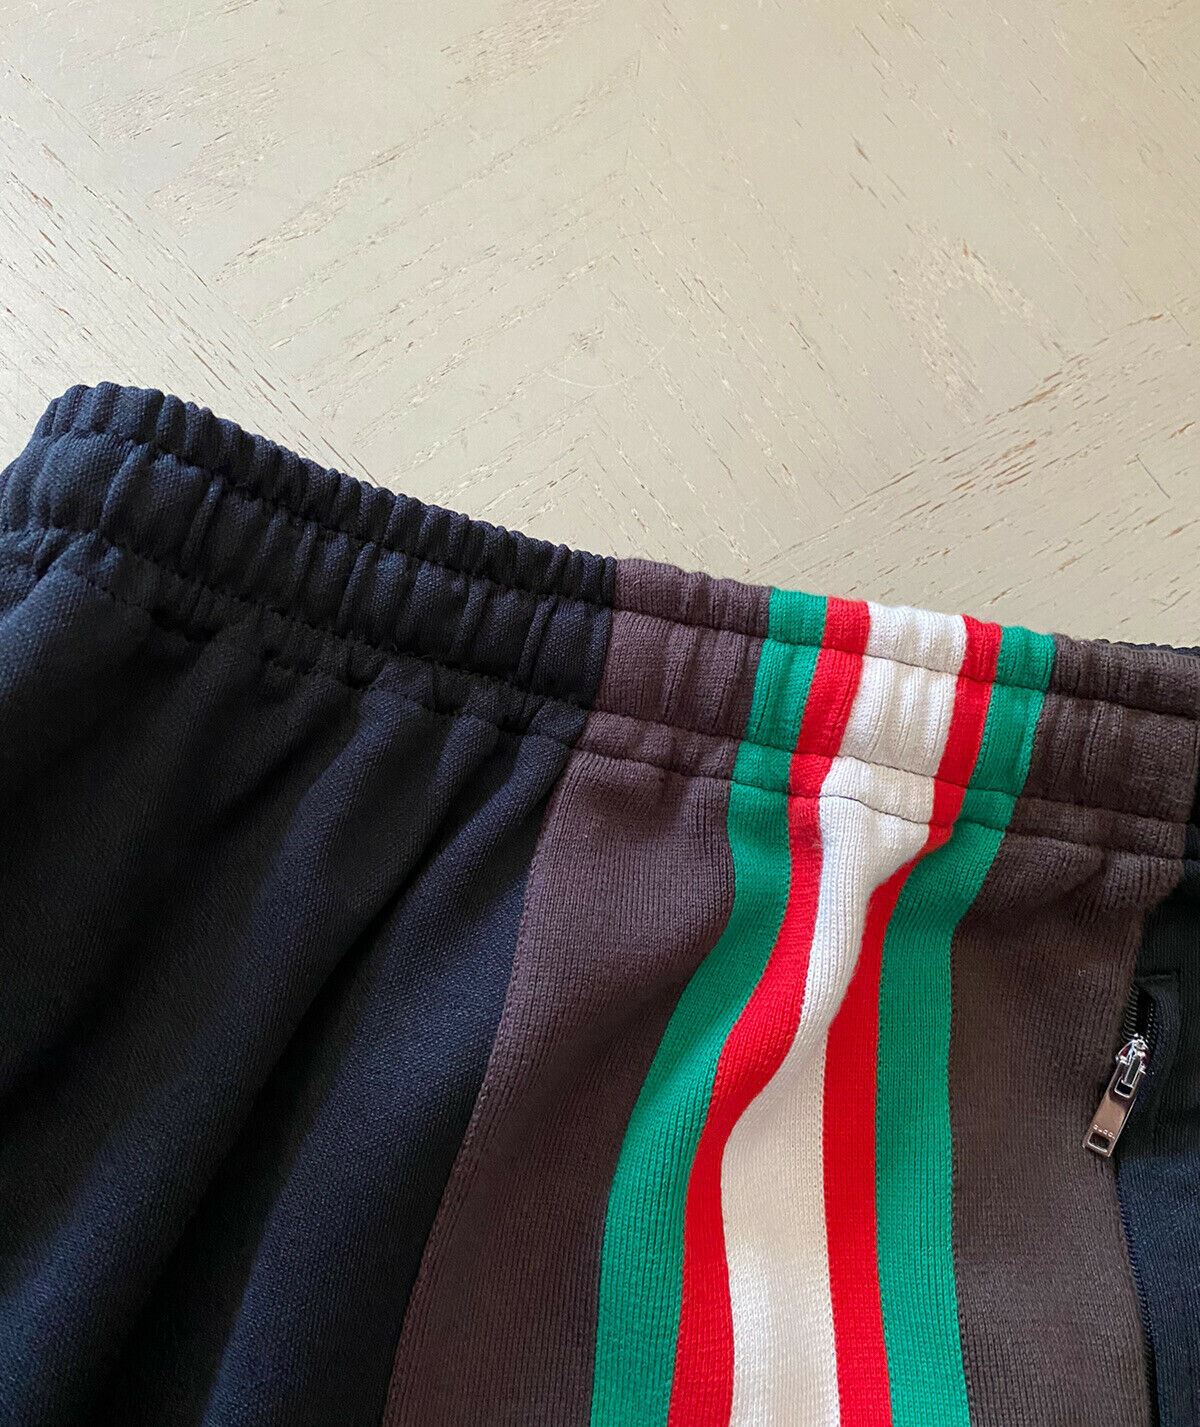 NWT  Gucci Mens Short Pants Black/Green/Red Size L Italy